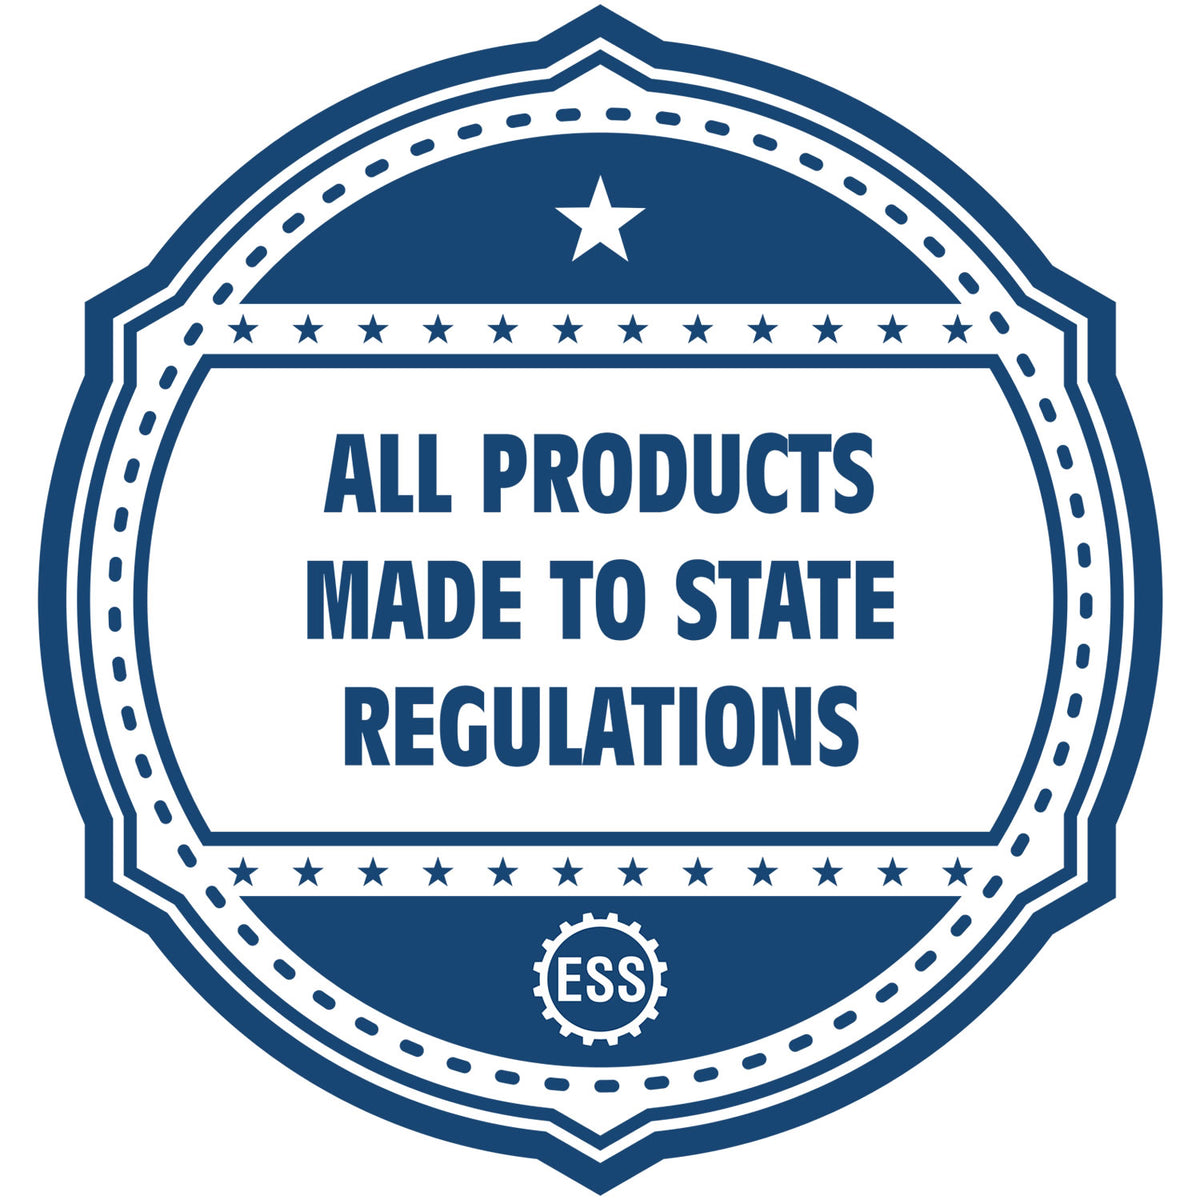 An icon or badge element for the PSI Nebraska Notary Stamp showing that this product is made in compliance with state regulations.